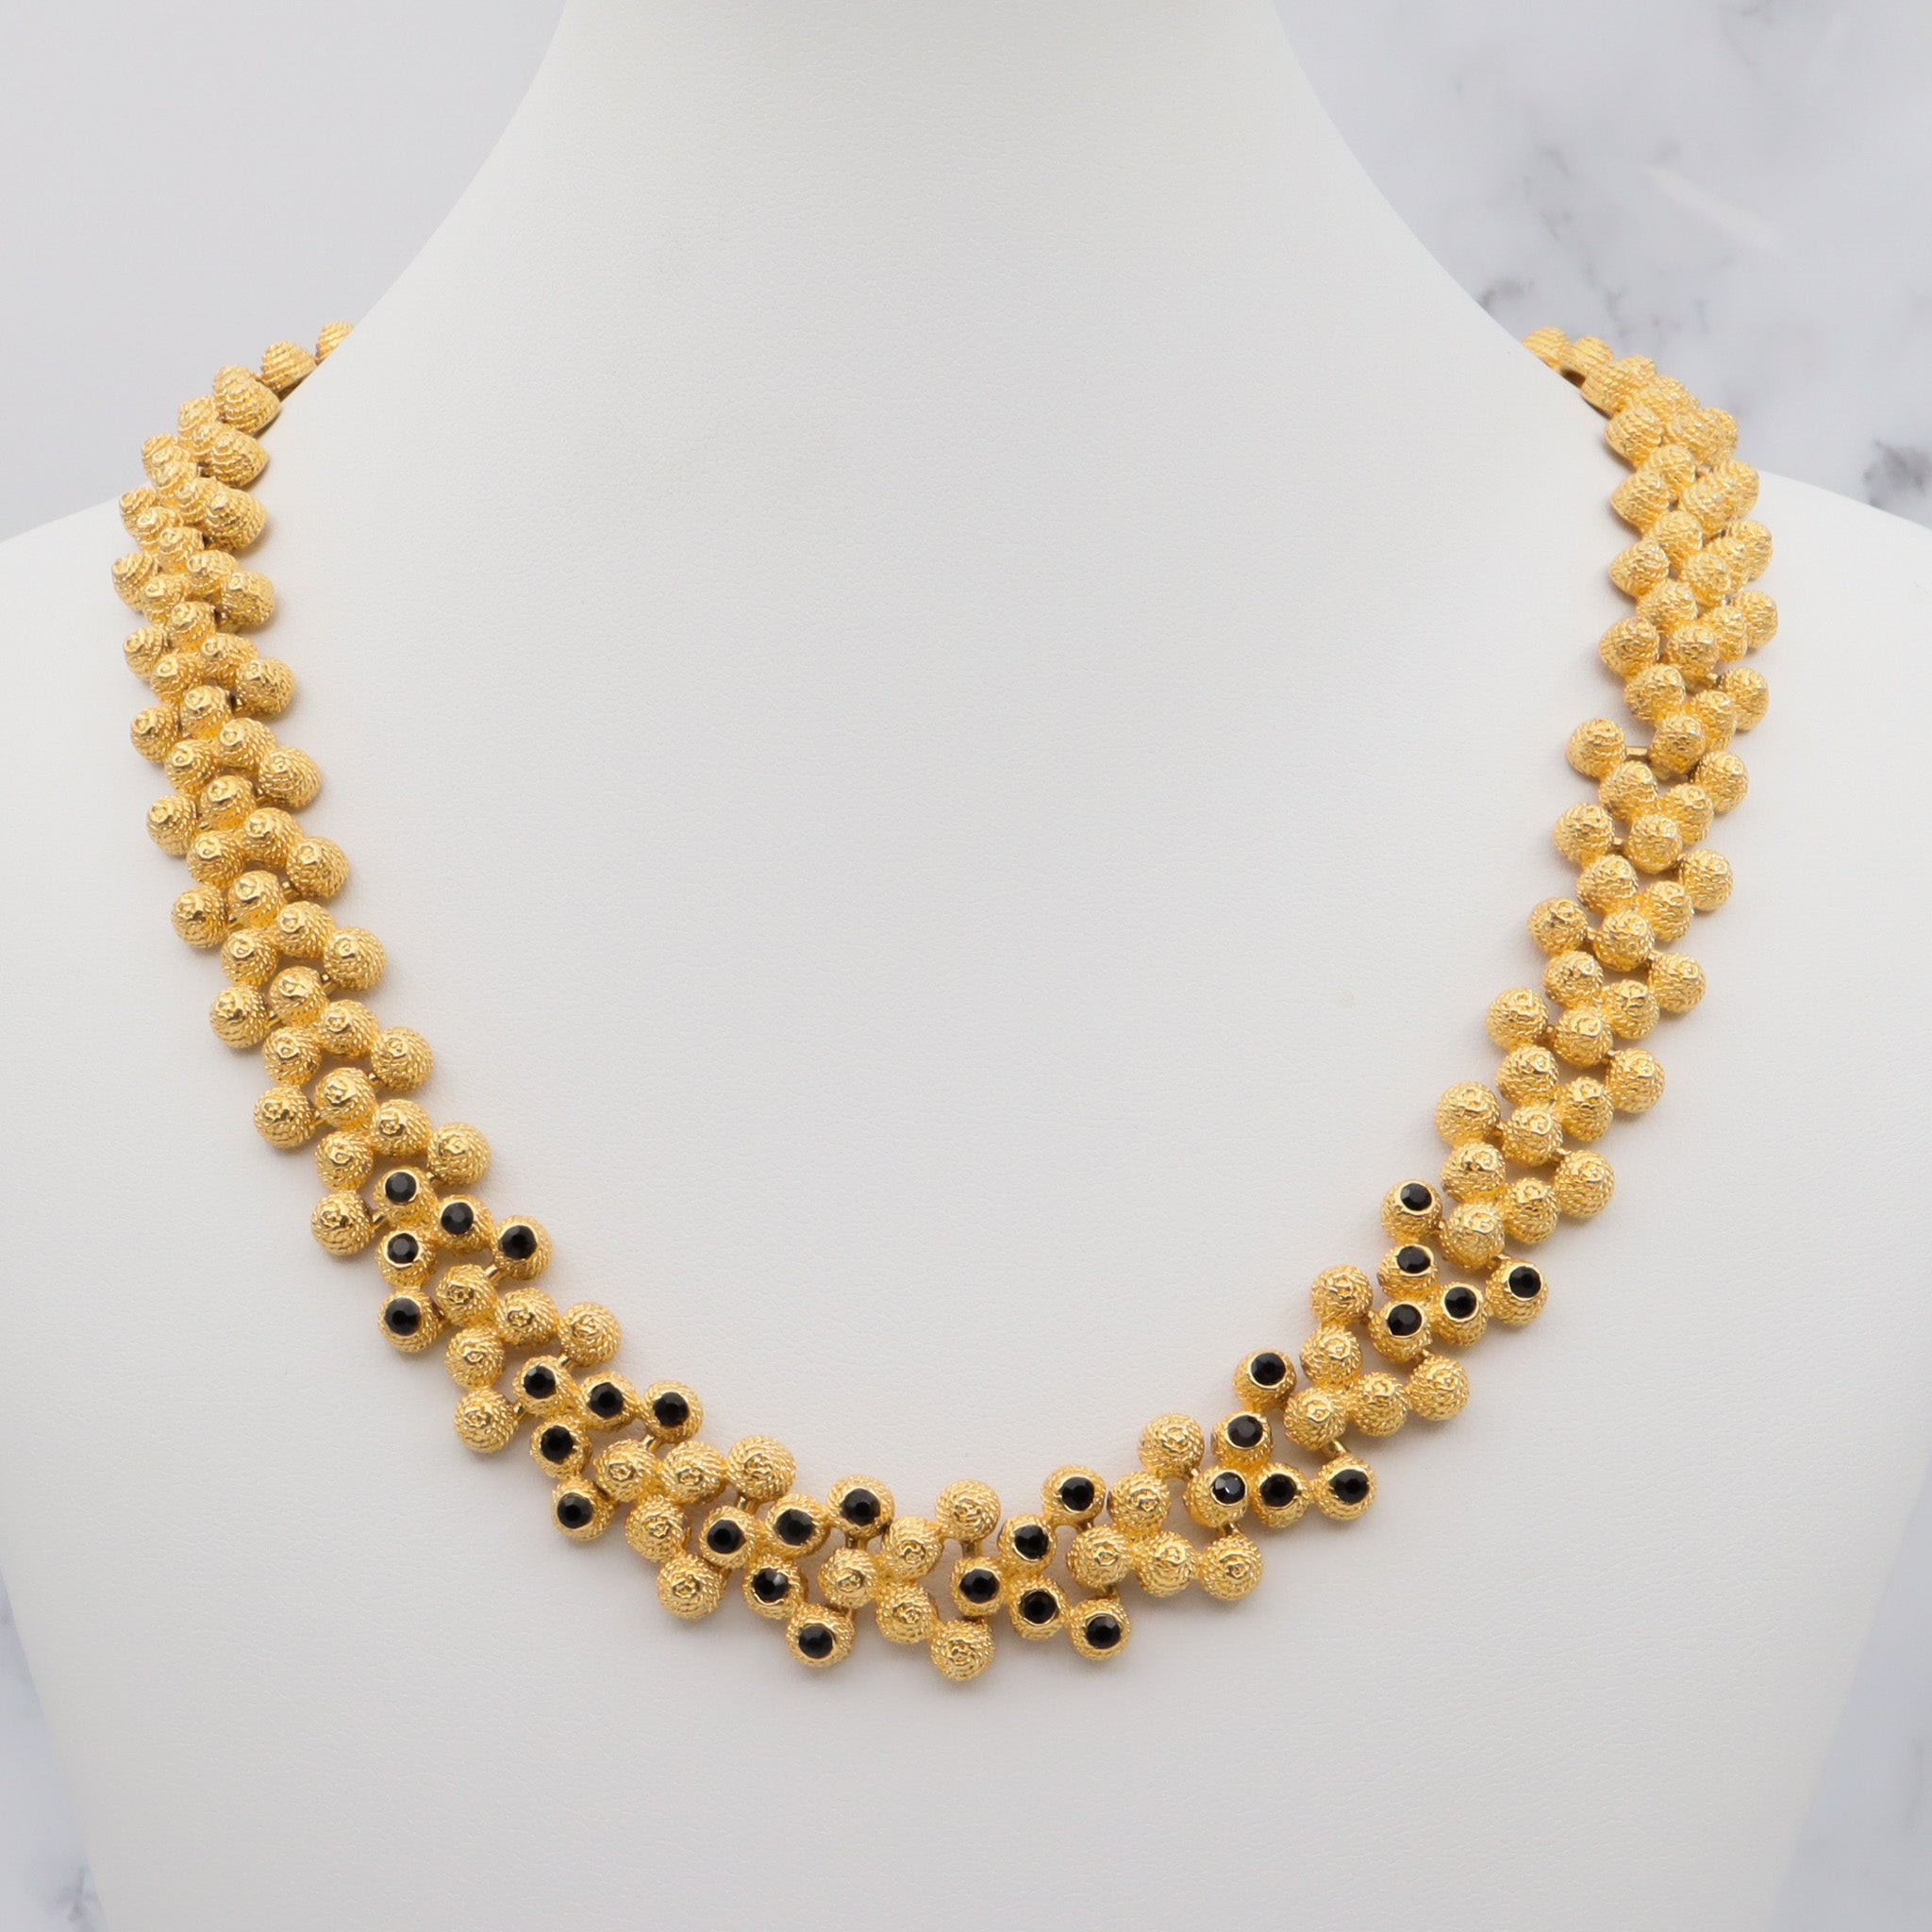 Vintage gold plated textured attached bead necklace with black glass tips